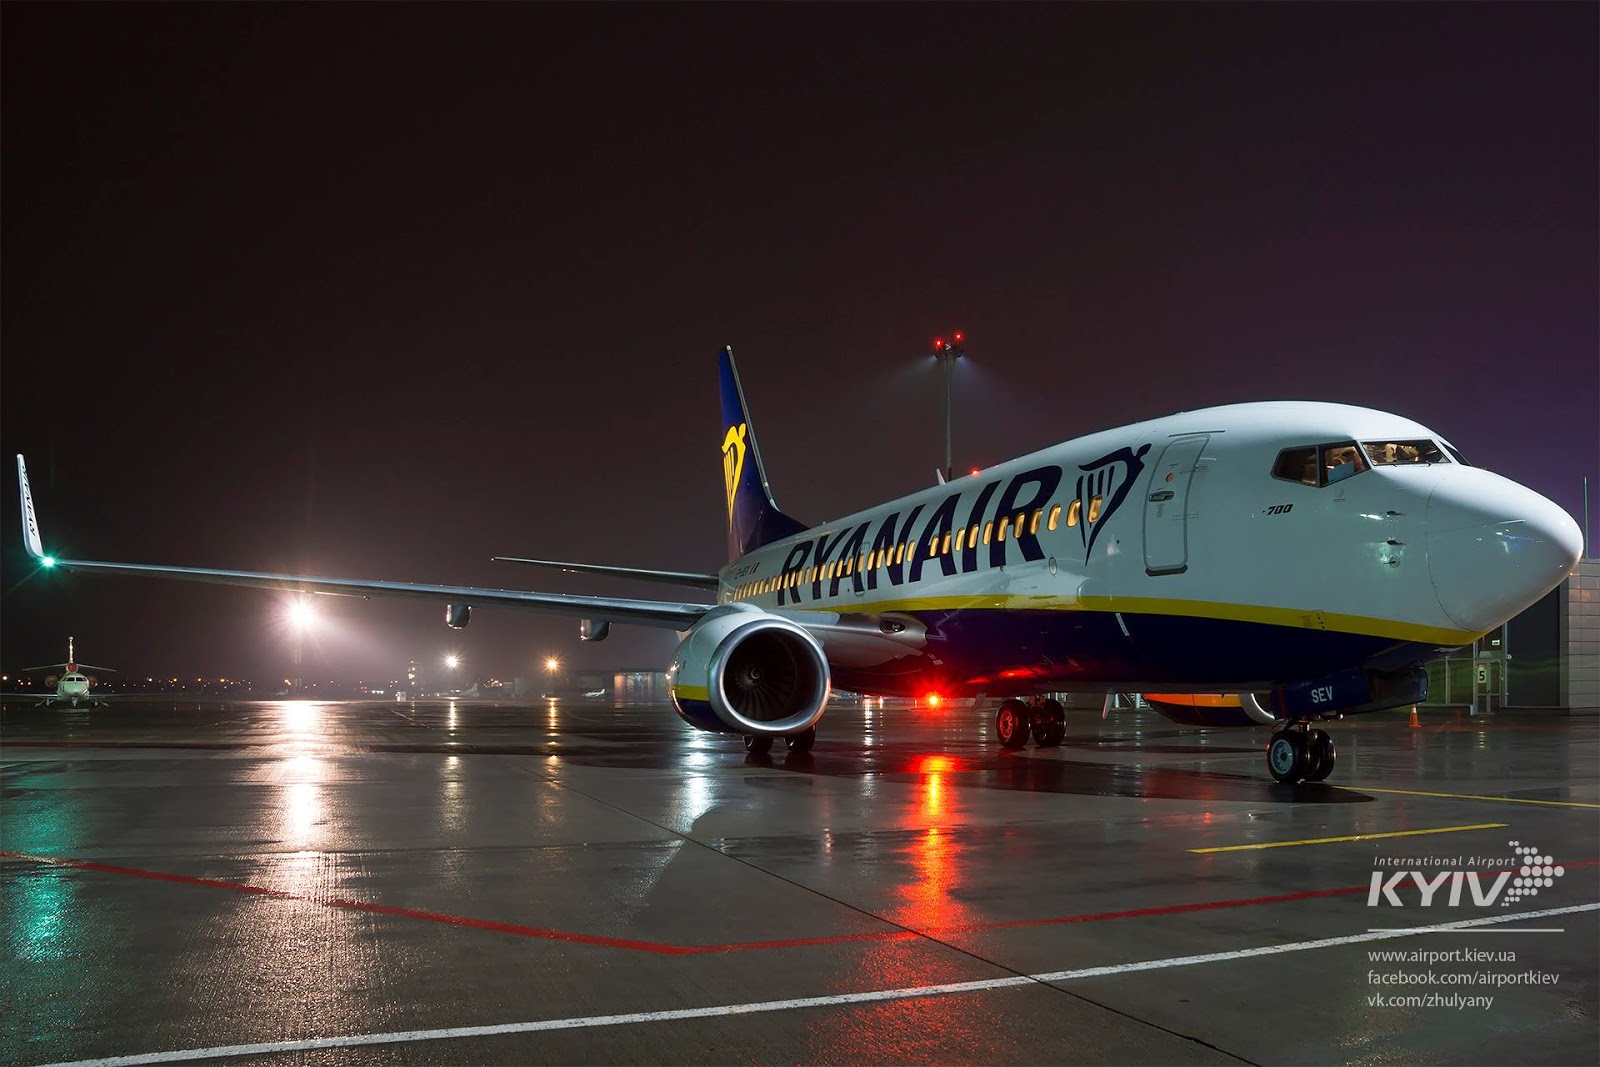 Why Ryanair ditched Ukraine, explained